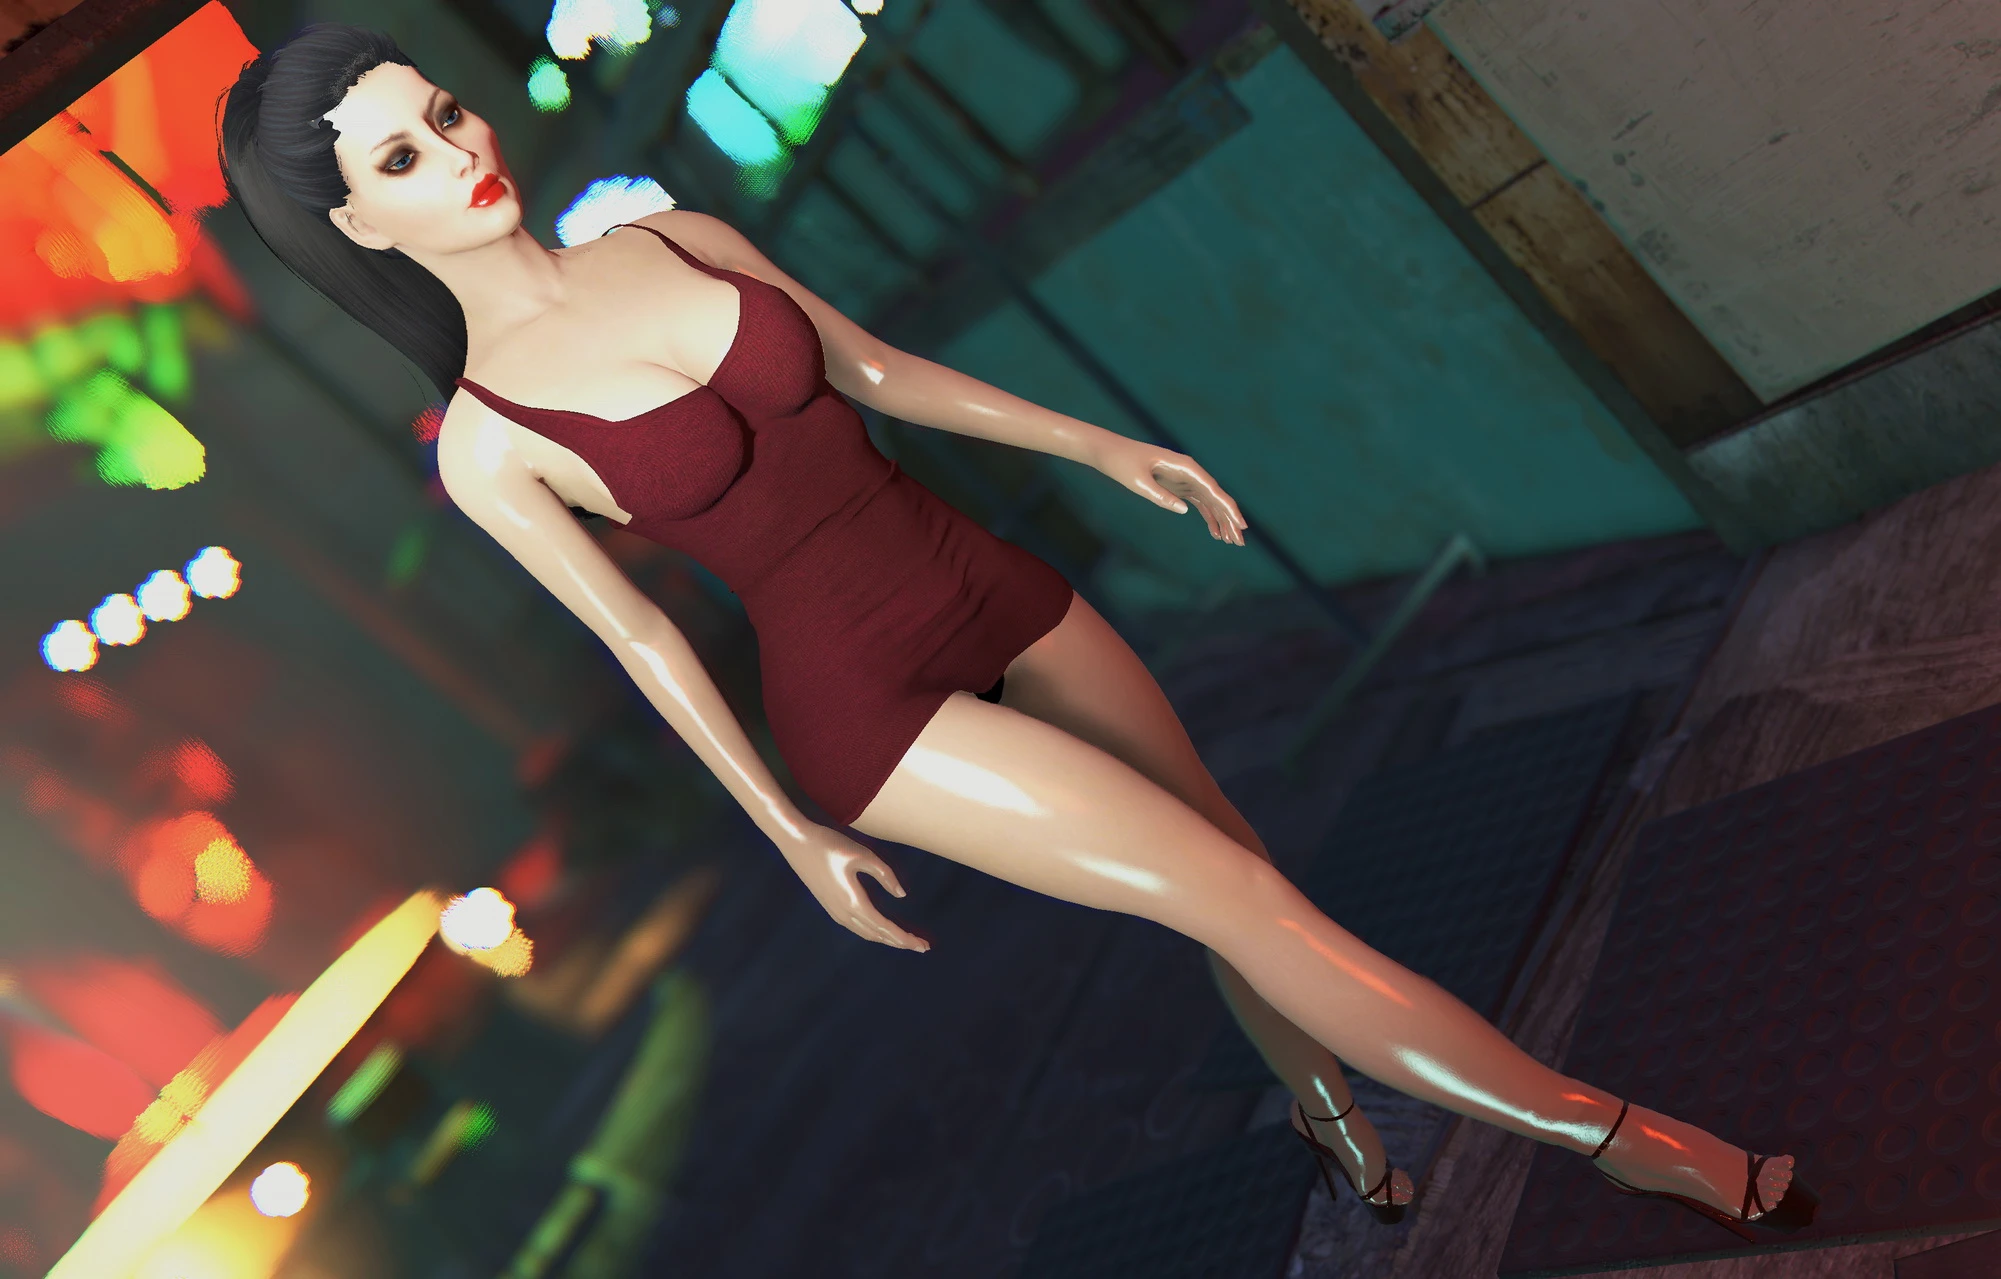 Legs mod. Fallout 4 High Heels System. Fallout 4 каблуки мод. Фоллаут 4 туфли на каблуках. Каблуки фоллаут.